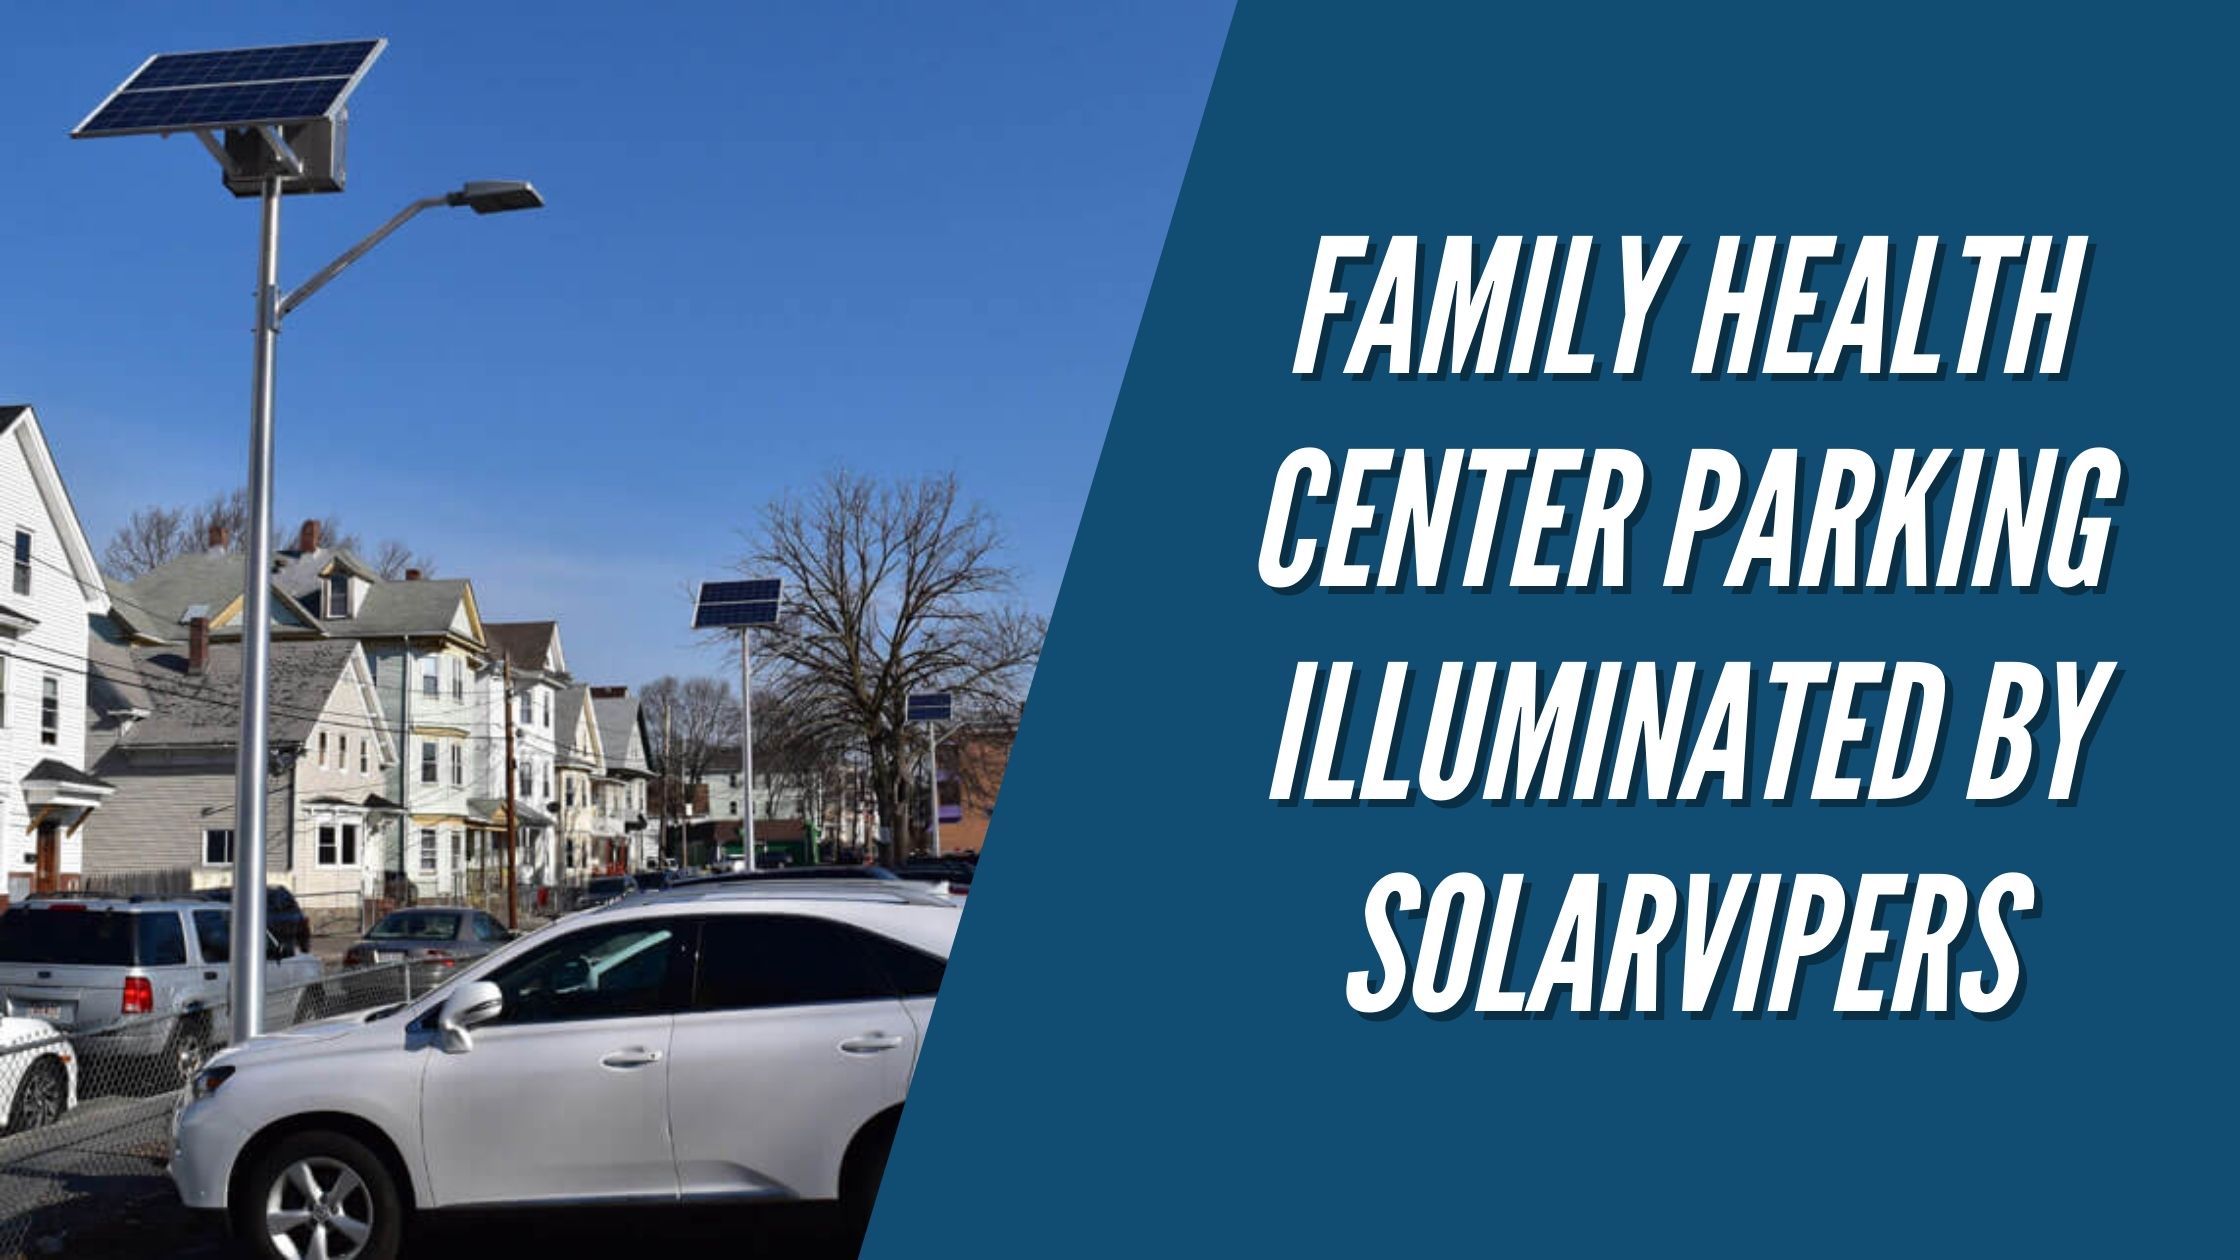 Family Health Center Parking Illuminated by SolarVipers